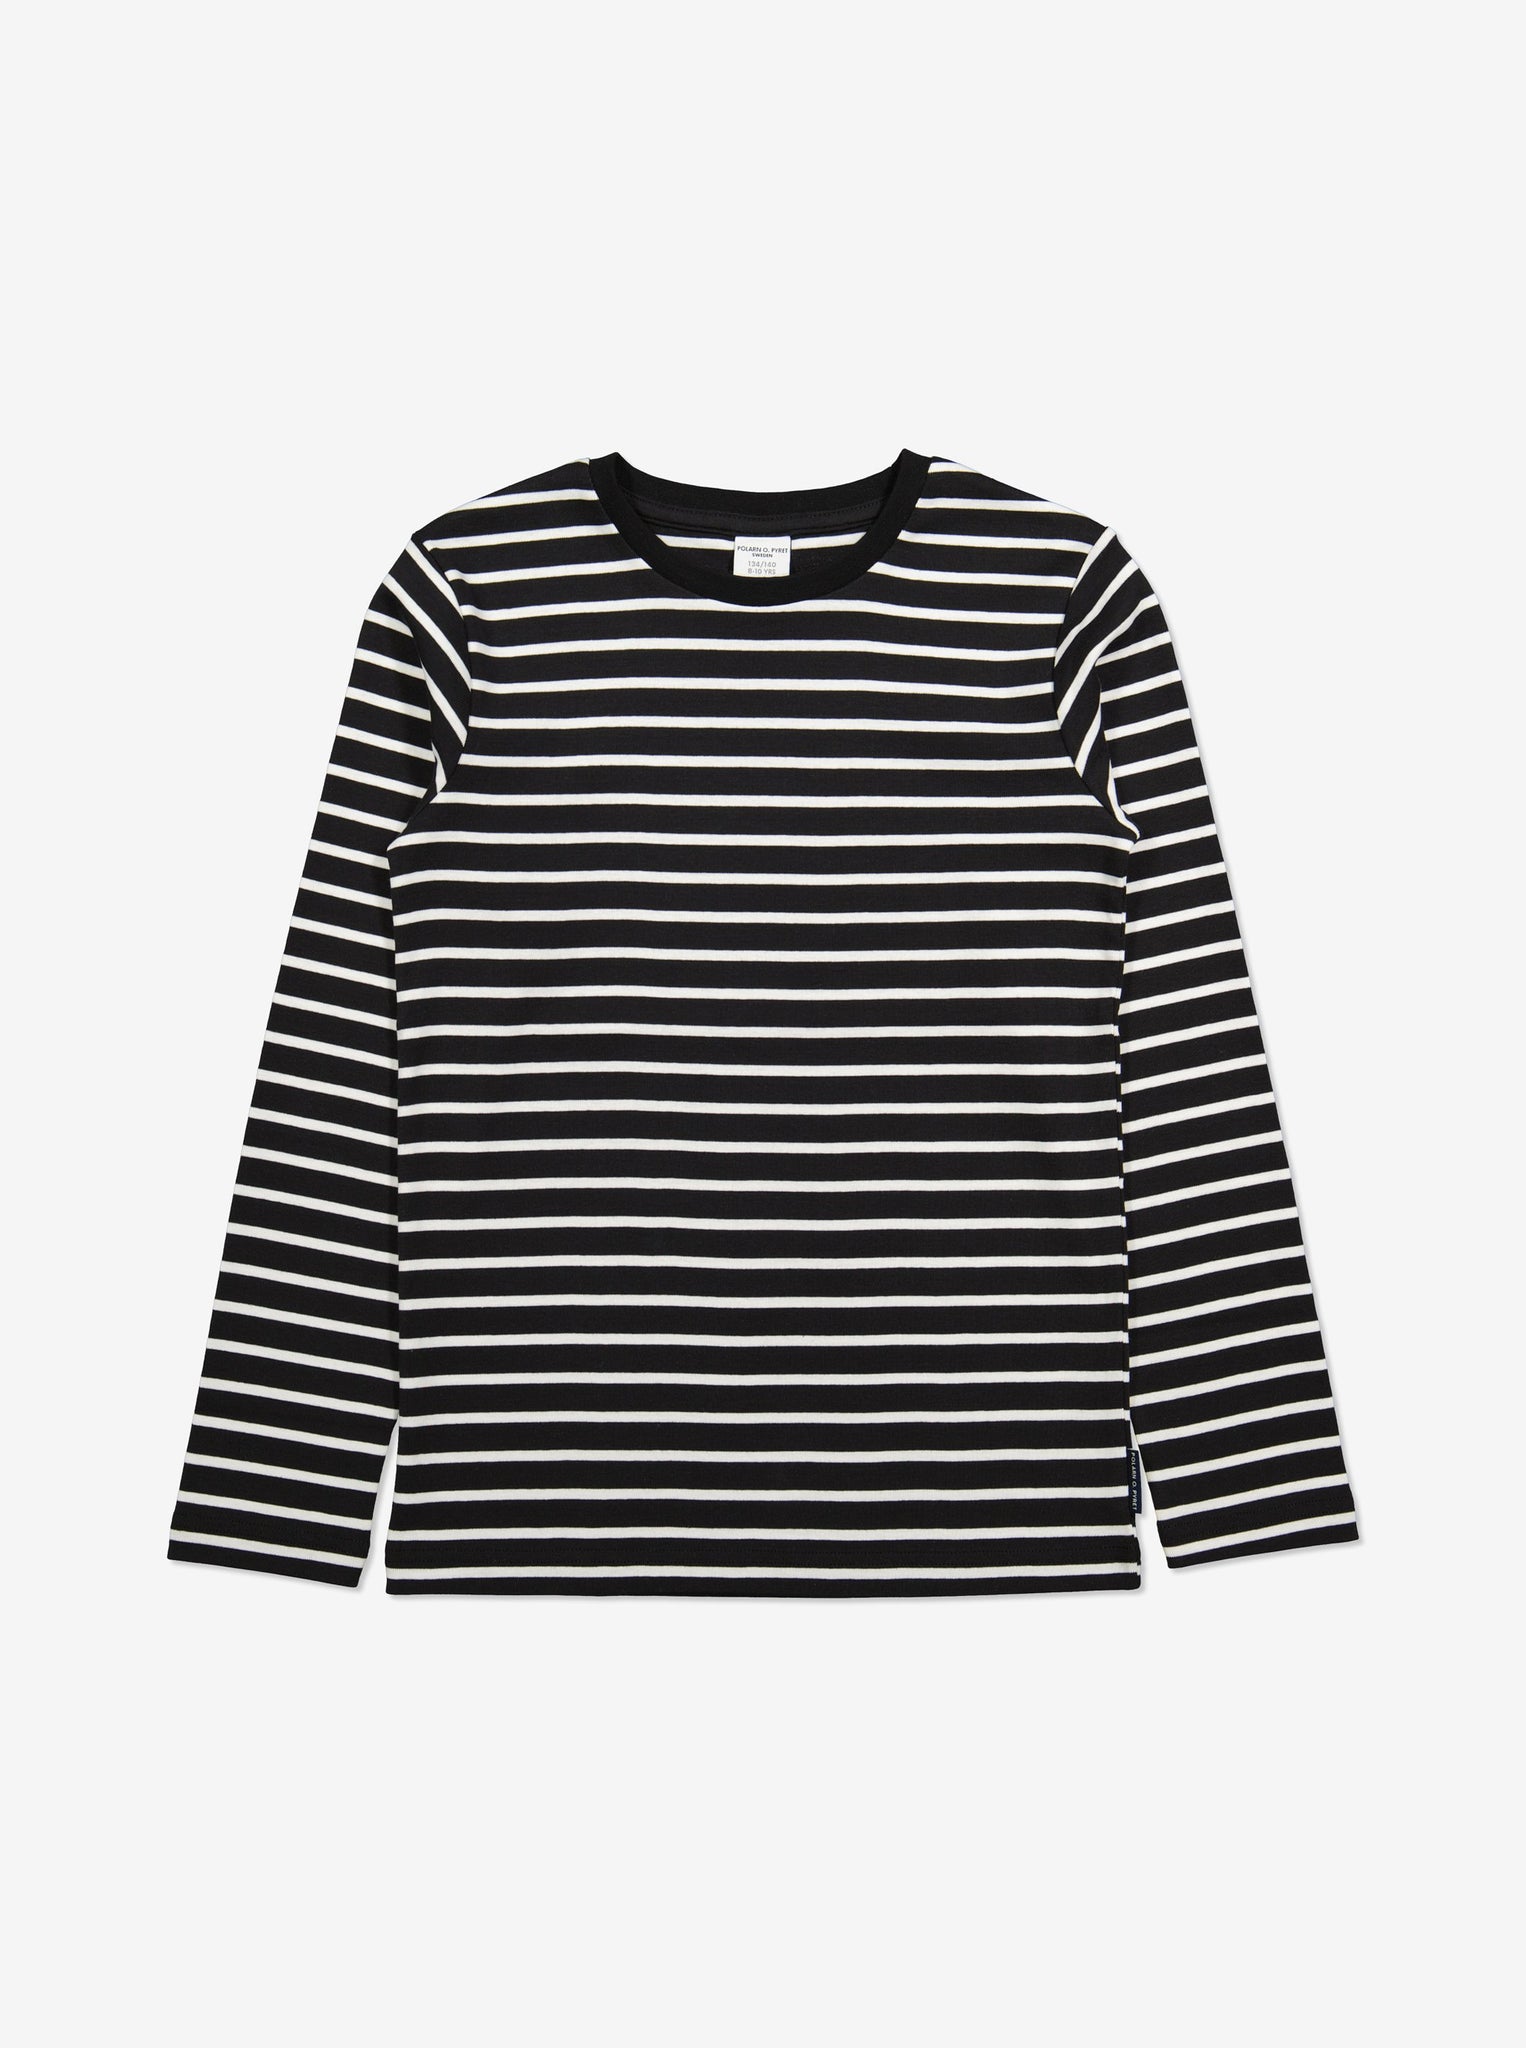  Organic Black Striped Kids Top from Polarn O. Pyret Kidswear. Made with 100% organic cotton.